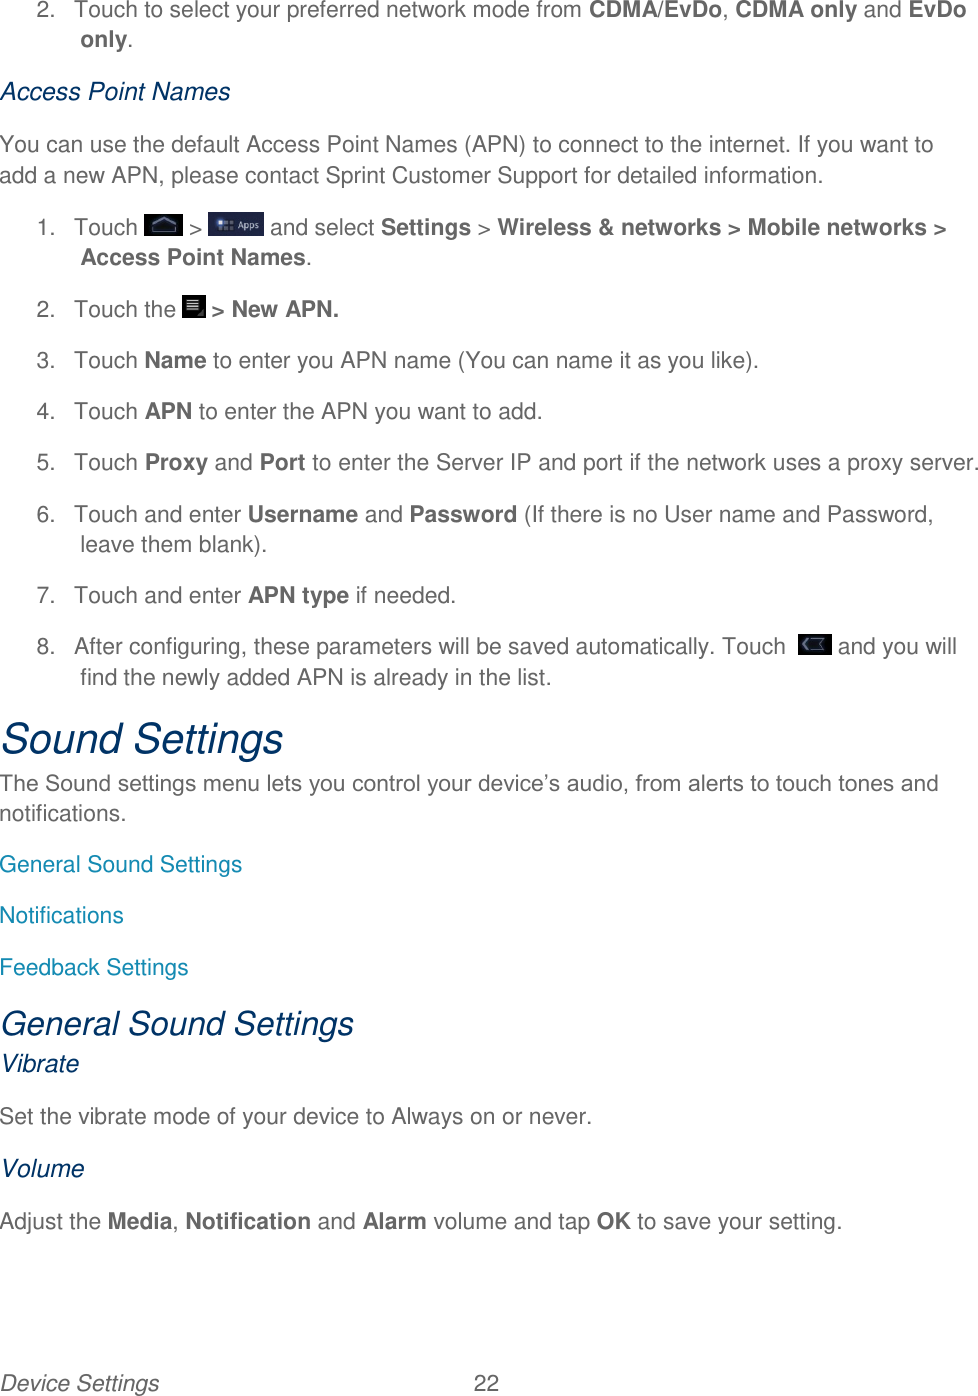 Device Settings  22   2.  Touch to select your preferred network mode from CDMA/EvDo, CDMA only and EvDo only.  Access Point Names You can use the default Access Point Names (APN) to connect to the internet. If you want to add a new APN, please contact Sprint Customer Support for detailed information. 1.  Touch  &gt;   and select Settings &gt; Wireless &amp; networks &gt; Mobile networks &gt; Access Point Names. 2.  Touch the   &gt; New APN. 3.  Touch Name to enter you APN name (You can name it as you like). 4.  Touch APN to enter the APN you want to add. 5.  Touch Proxy and Port to enter the Server IP and port if the network uses a proxy server. 6.  Touch and enter Username and Password (If there is no User name and Password, leave them blank). 7.  Touch and enter APN type if needed. 8.  After configuring, these parameters will be saved automatically. Touch    and you will find the newly added APN is already in the list. Sound Settings The Sound settings menu lets you control your device’s audio, from alerts to touch tones and notifications. General Sound Settings Notifications Feedback Settings General Sound Settings Vibrate Set the vibrate mode of your device to Always on or never. Volume Adjust the Media, Notification and Alarm volume and tap OK to save your setting. 